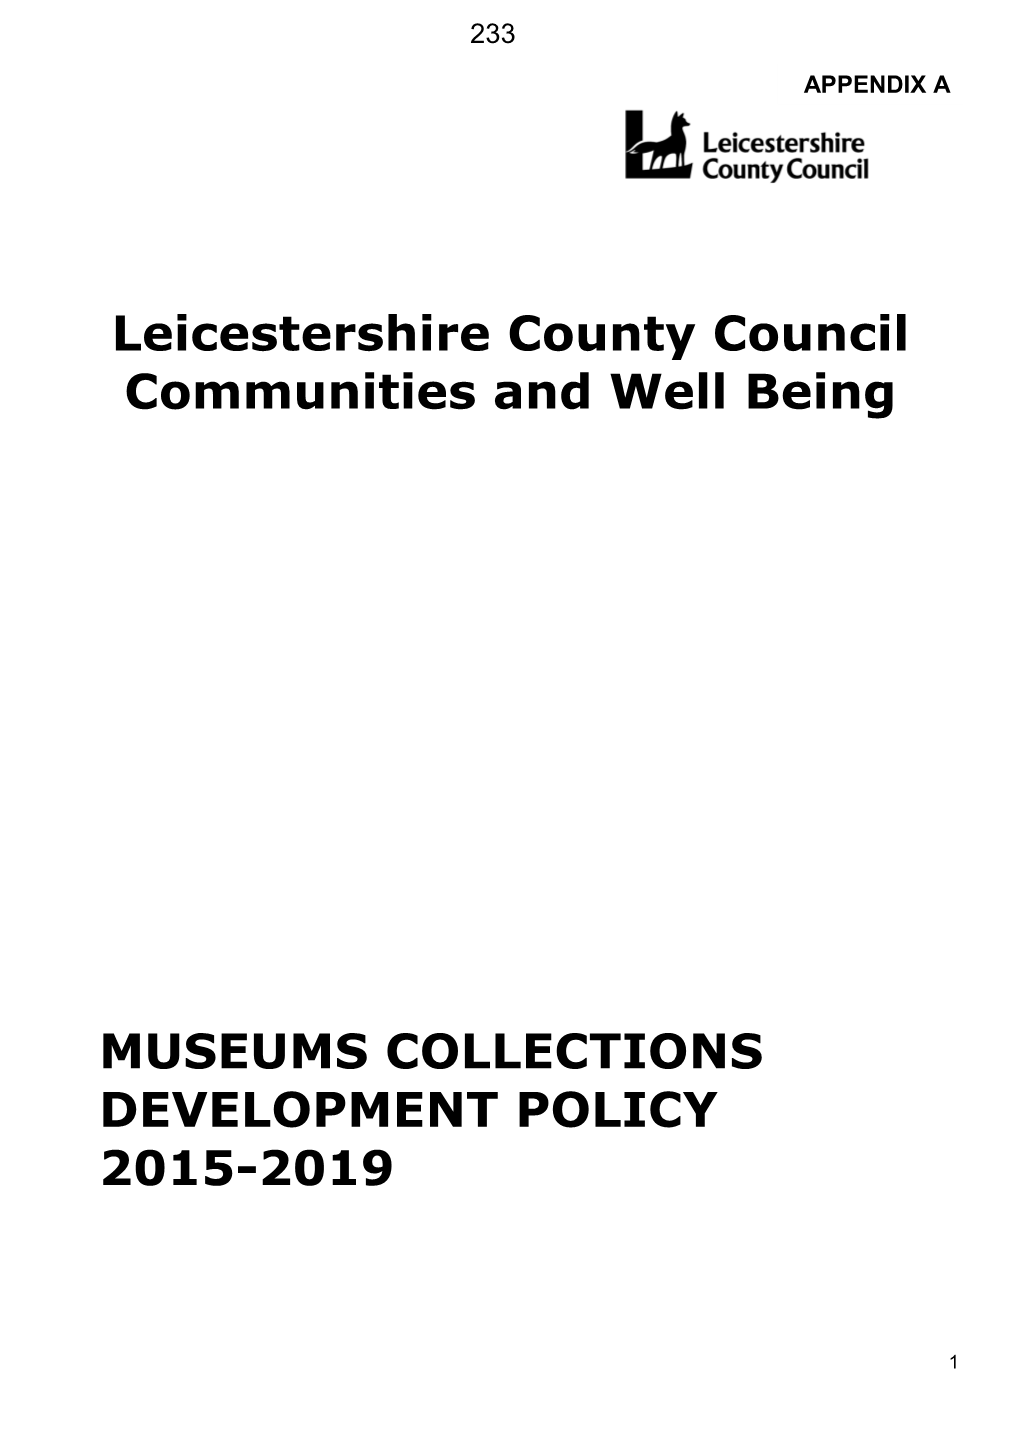 Leicestershire County Council Communities and Well Being